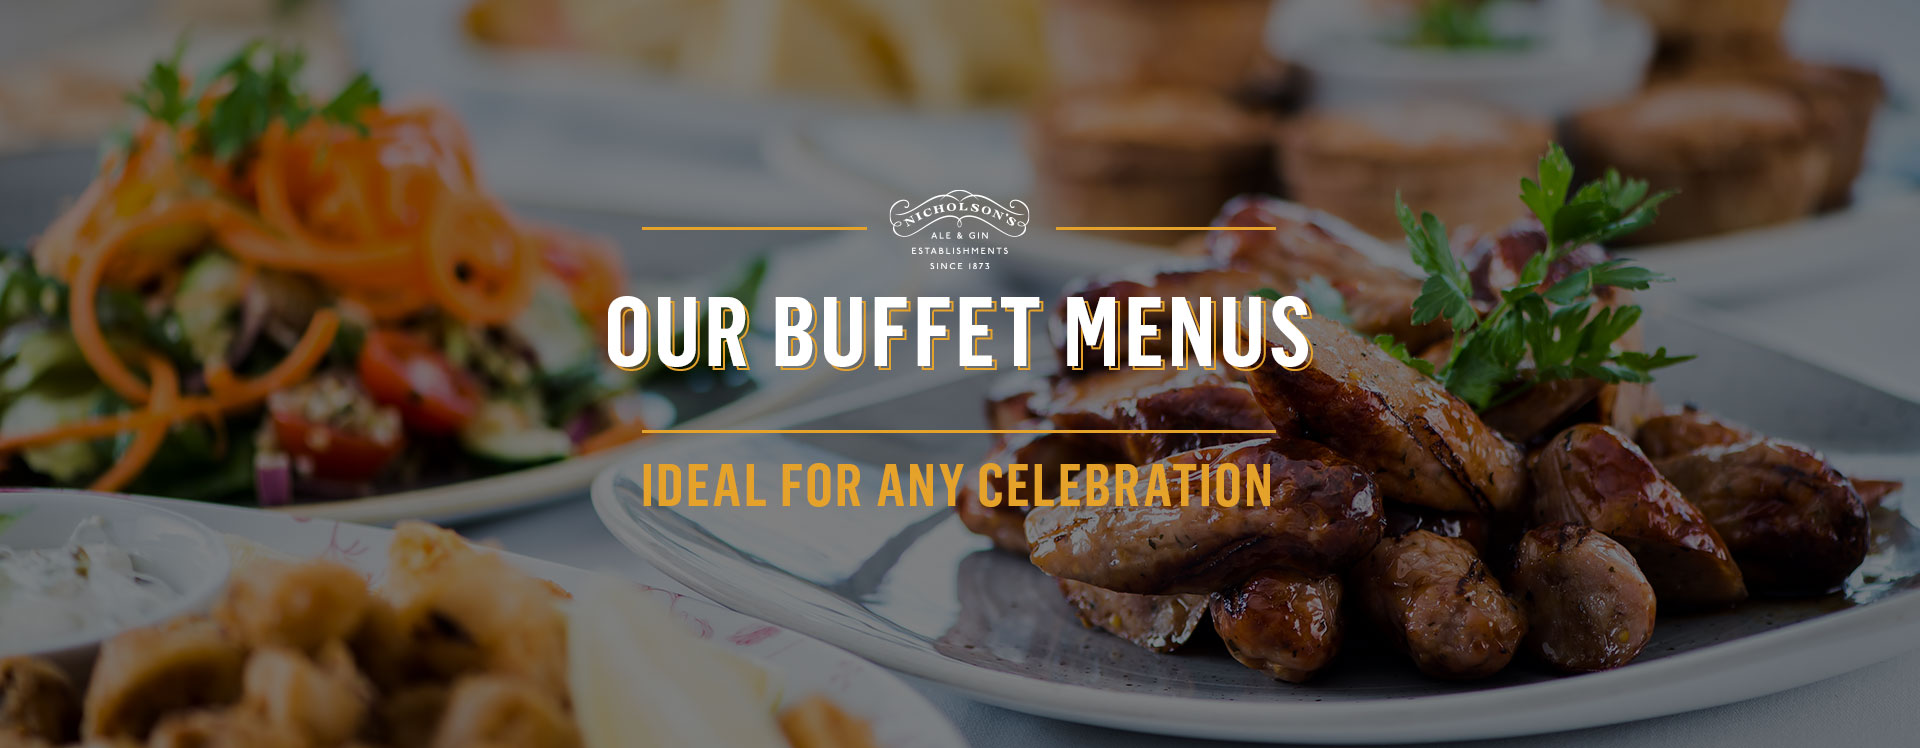 Buffet menu at The St George's Tavern - Book a table